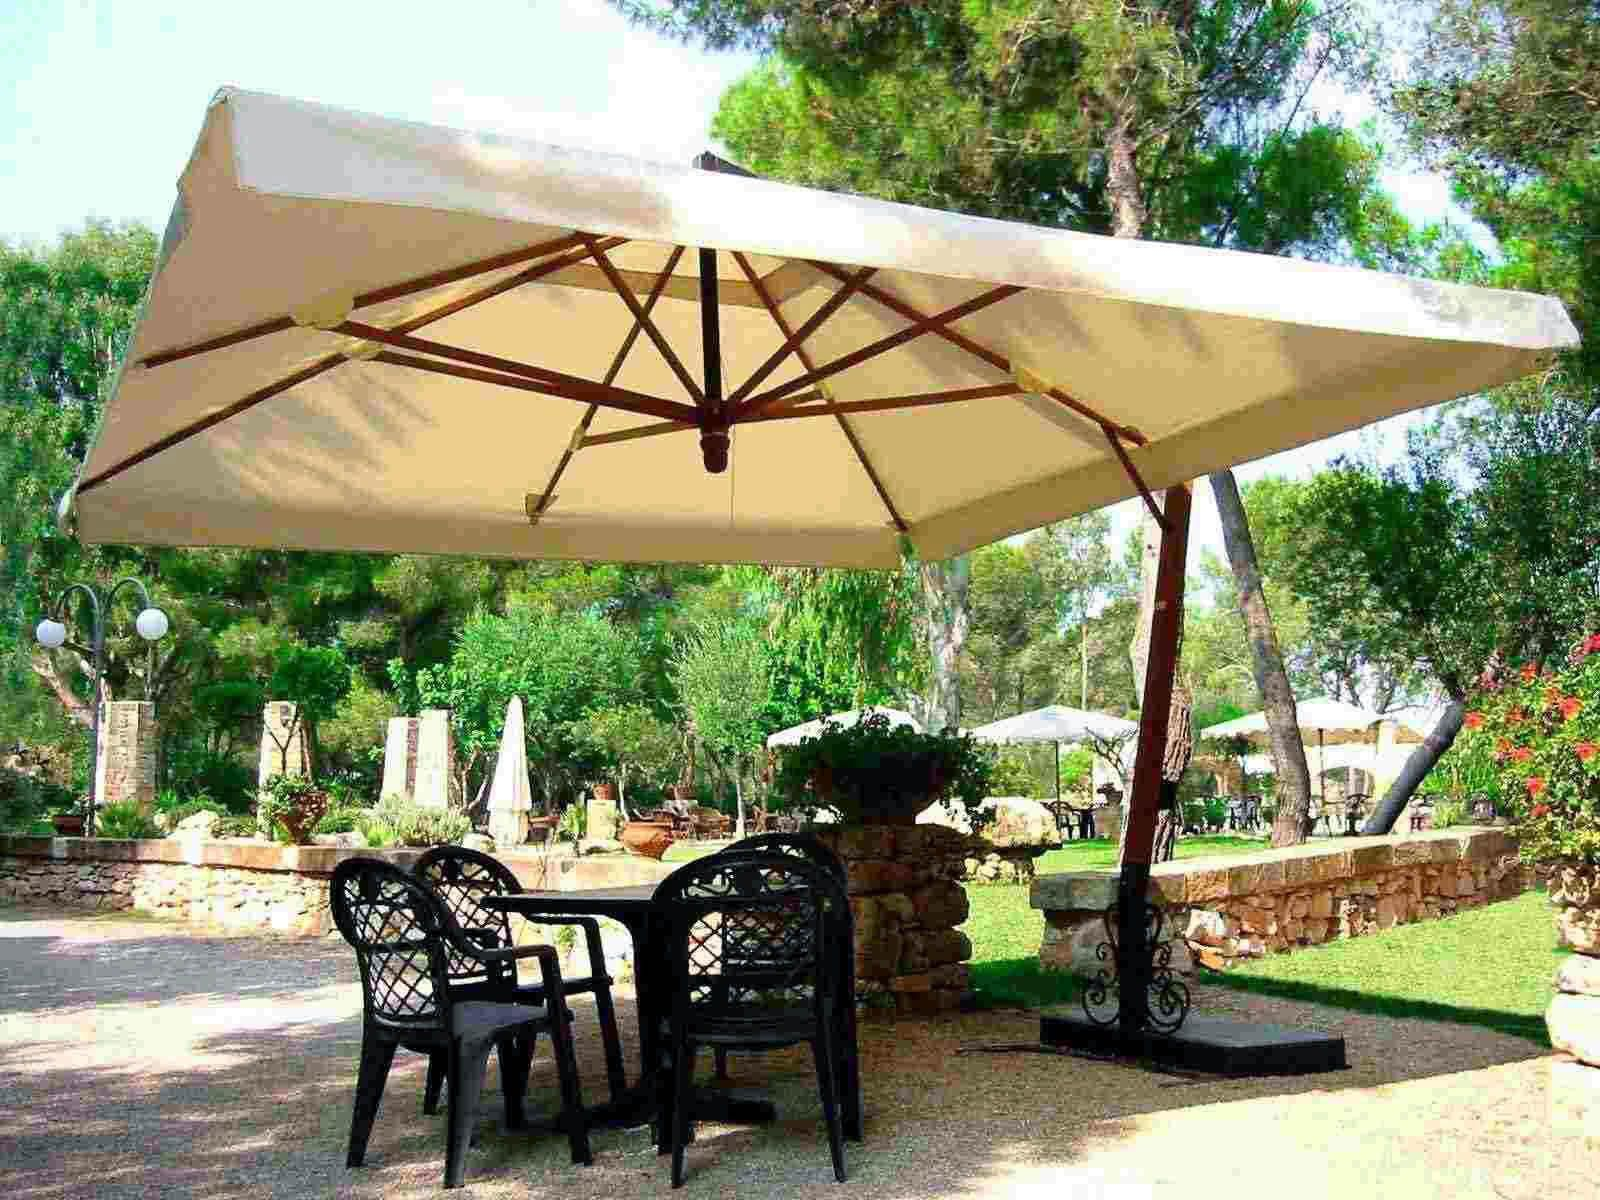 Unbelievable Baja Deck Pool Umbrella For Your Home Deck Umbrella intended for proportions 1600 X 1200